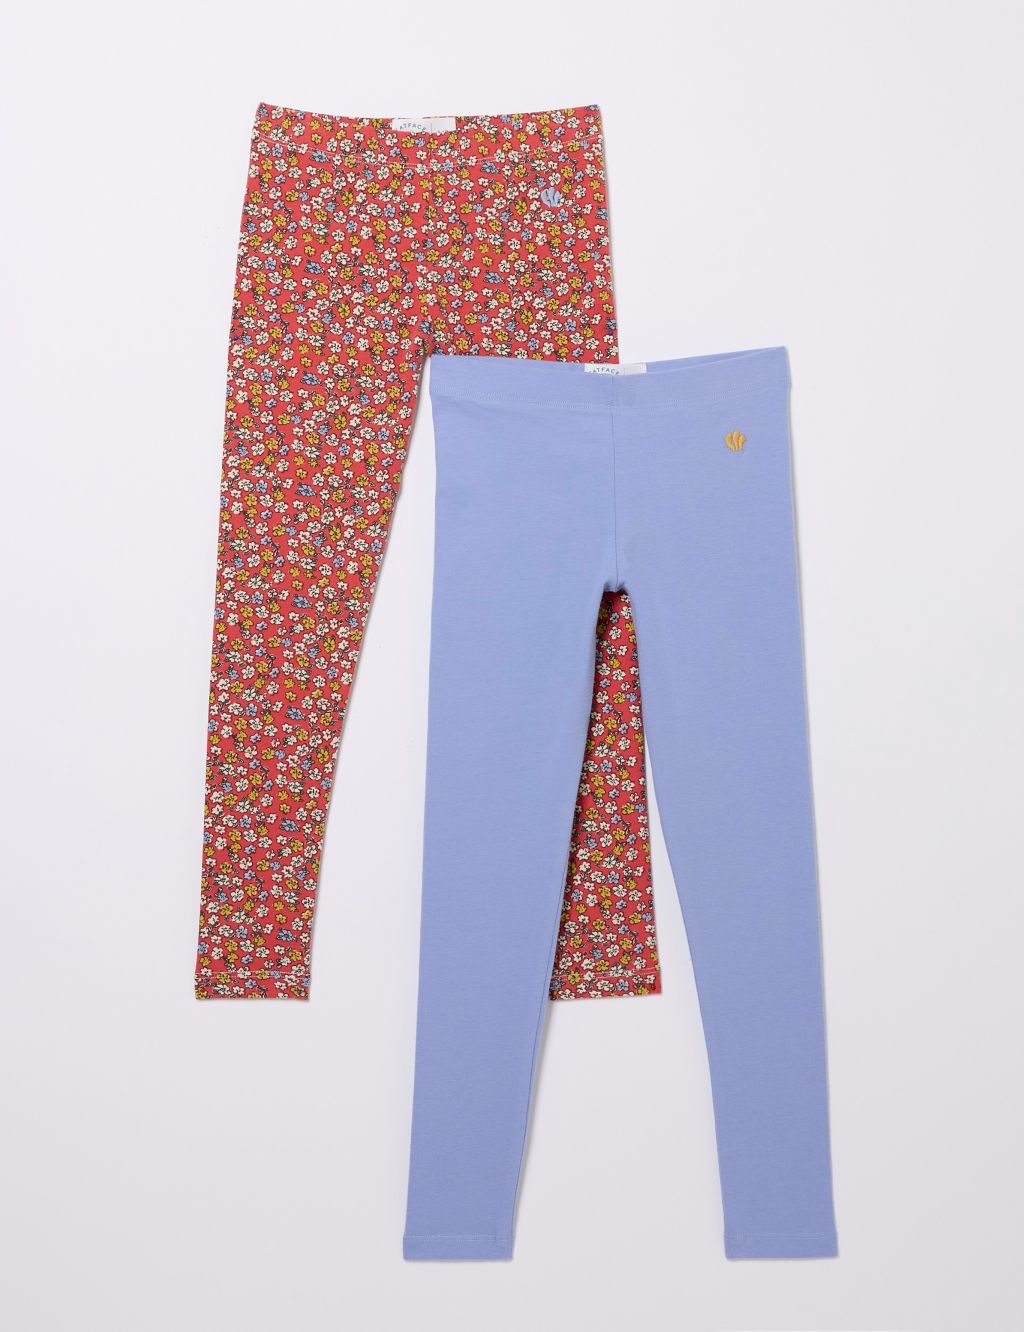 2pc Skinny Cotton Rich Patterned Leggings (3-13 Yrs) image 1